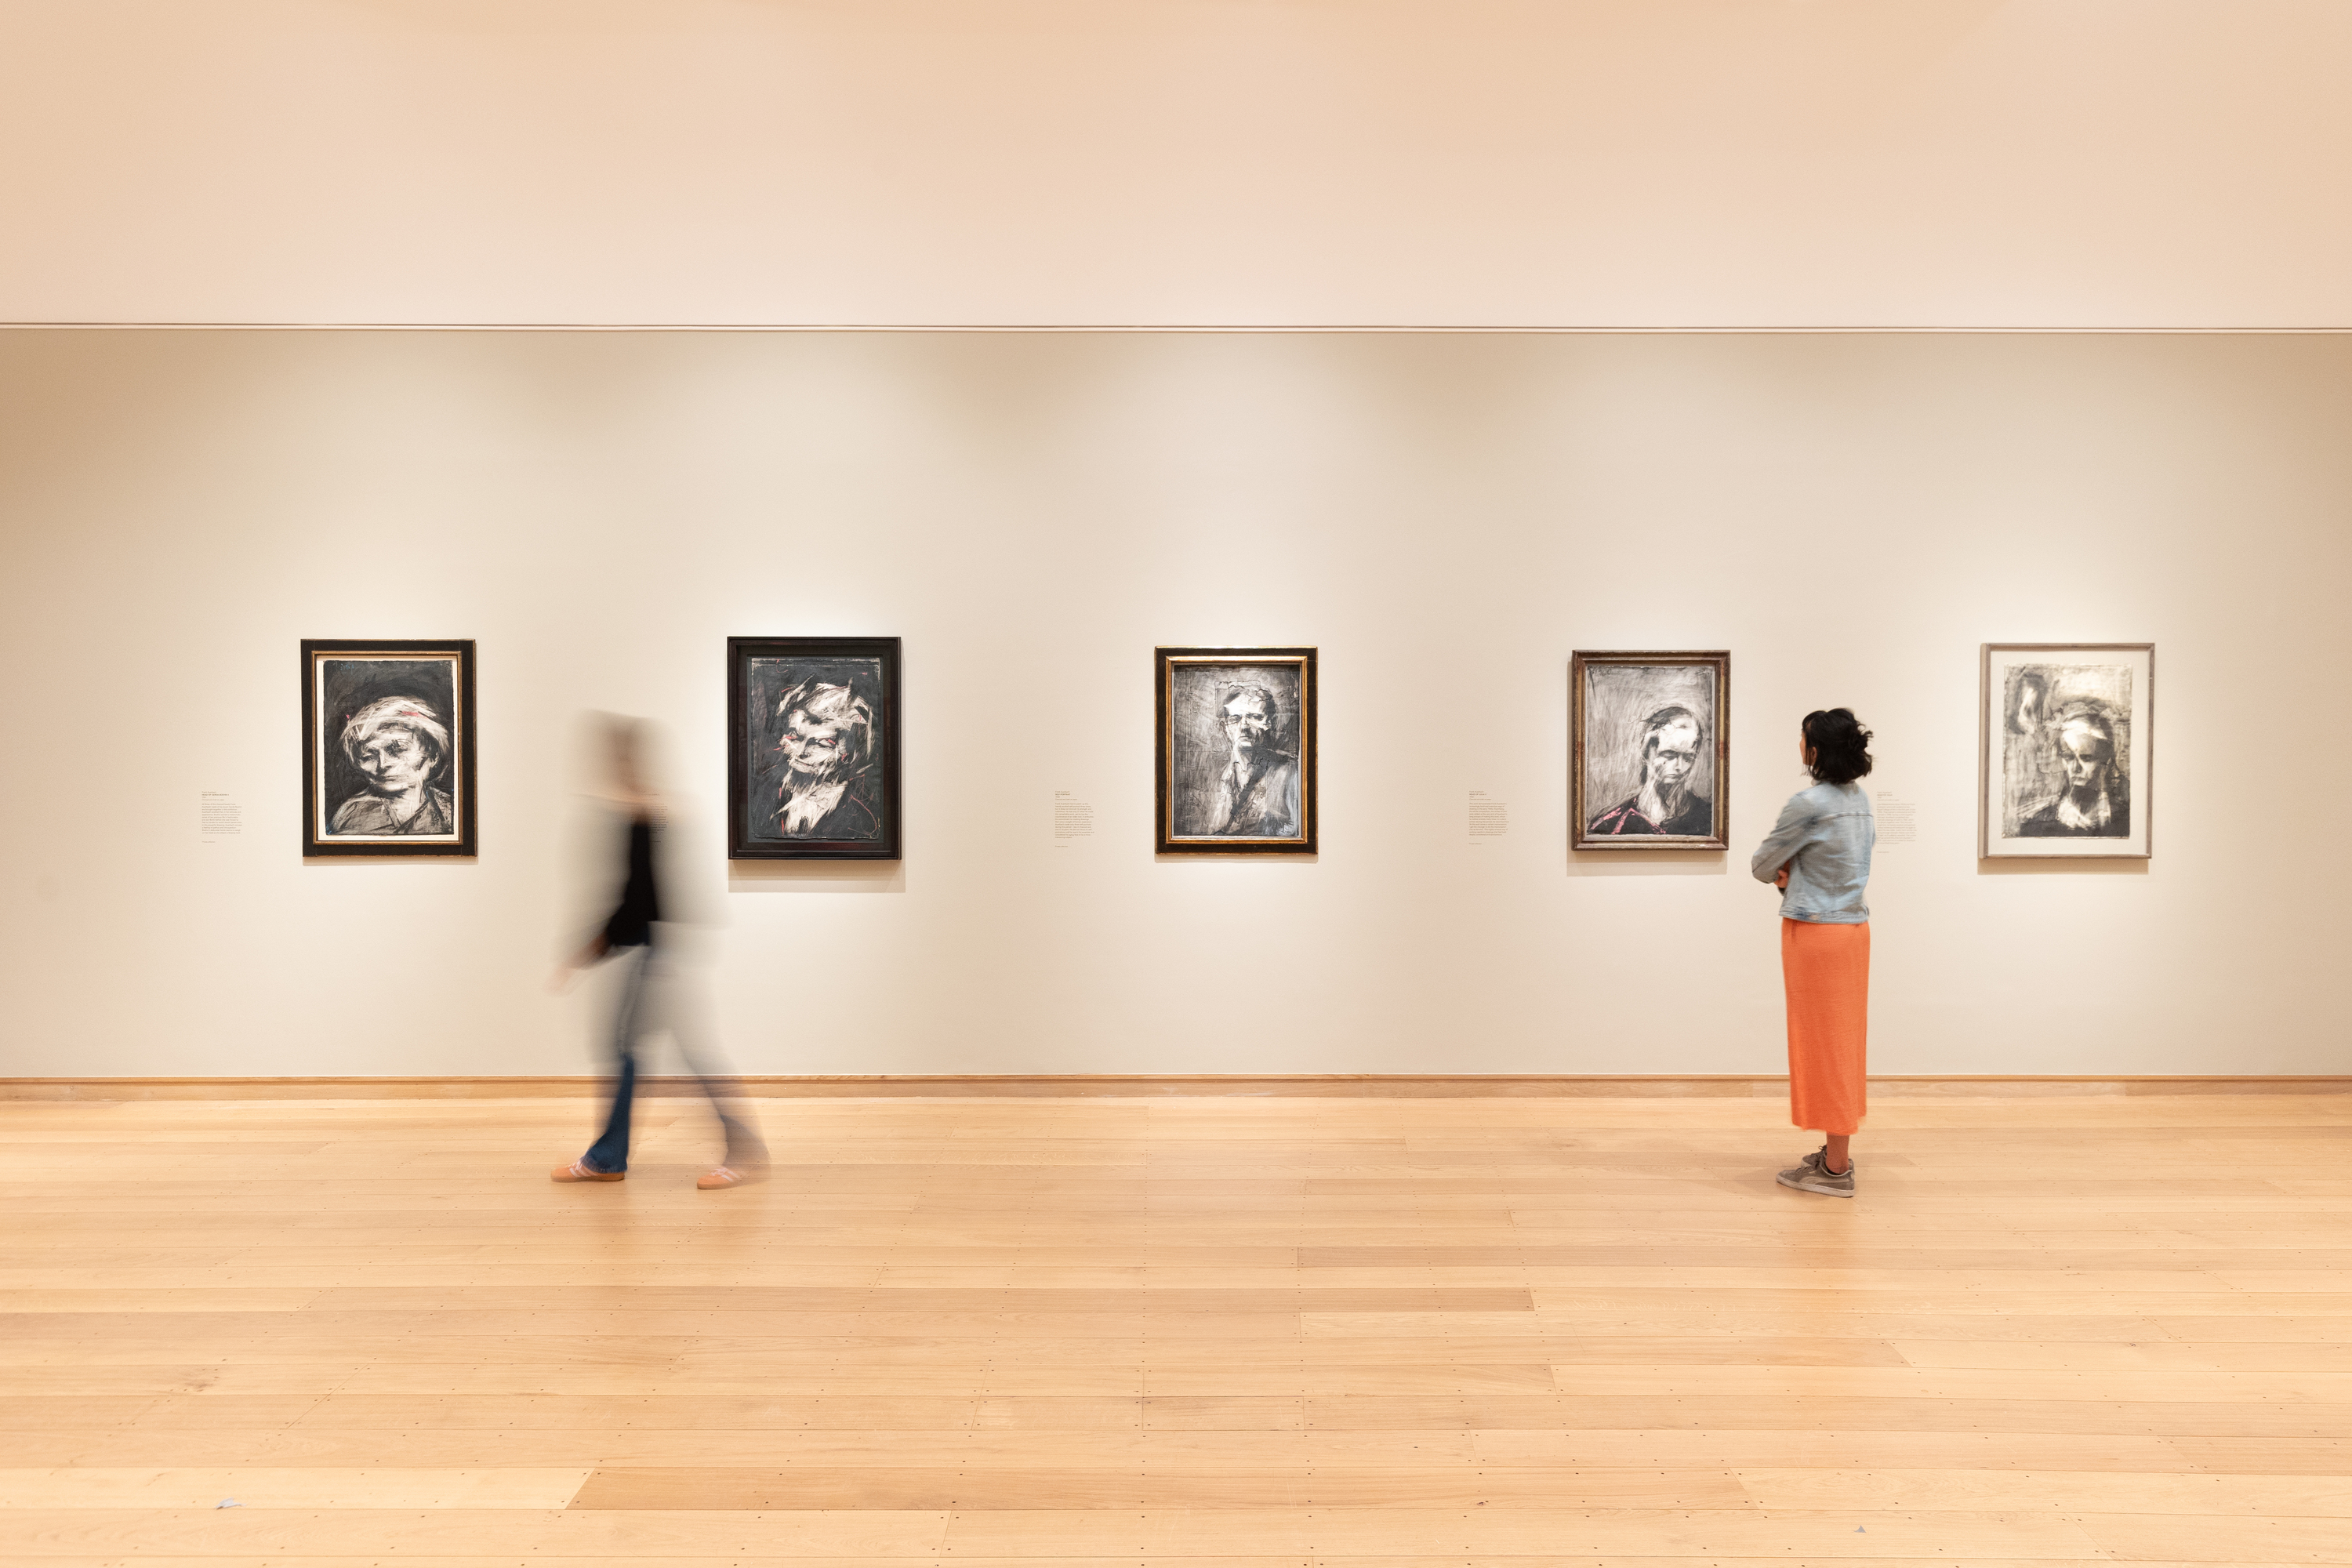 2. Frank Auerbach The Charcoal Heads at The Courtauld Gallery. Installation View. Photo Fergus Carmichael